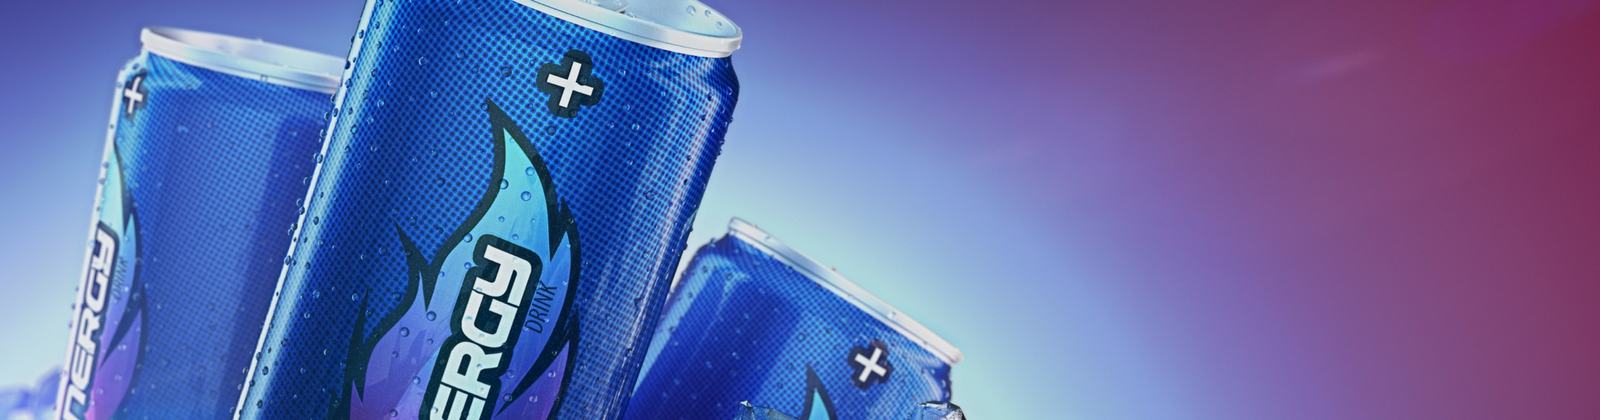 To concentrate or confiscate – banning energy drinks in schools